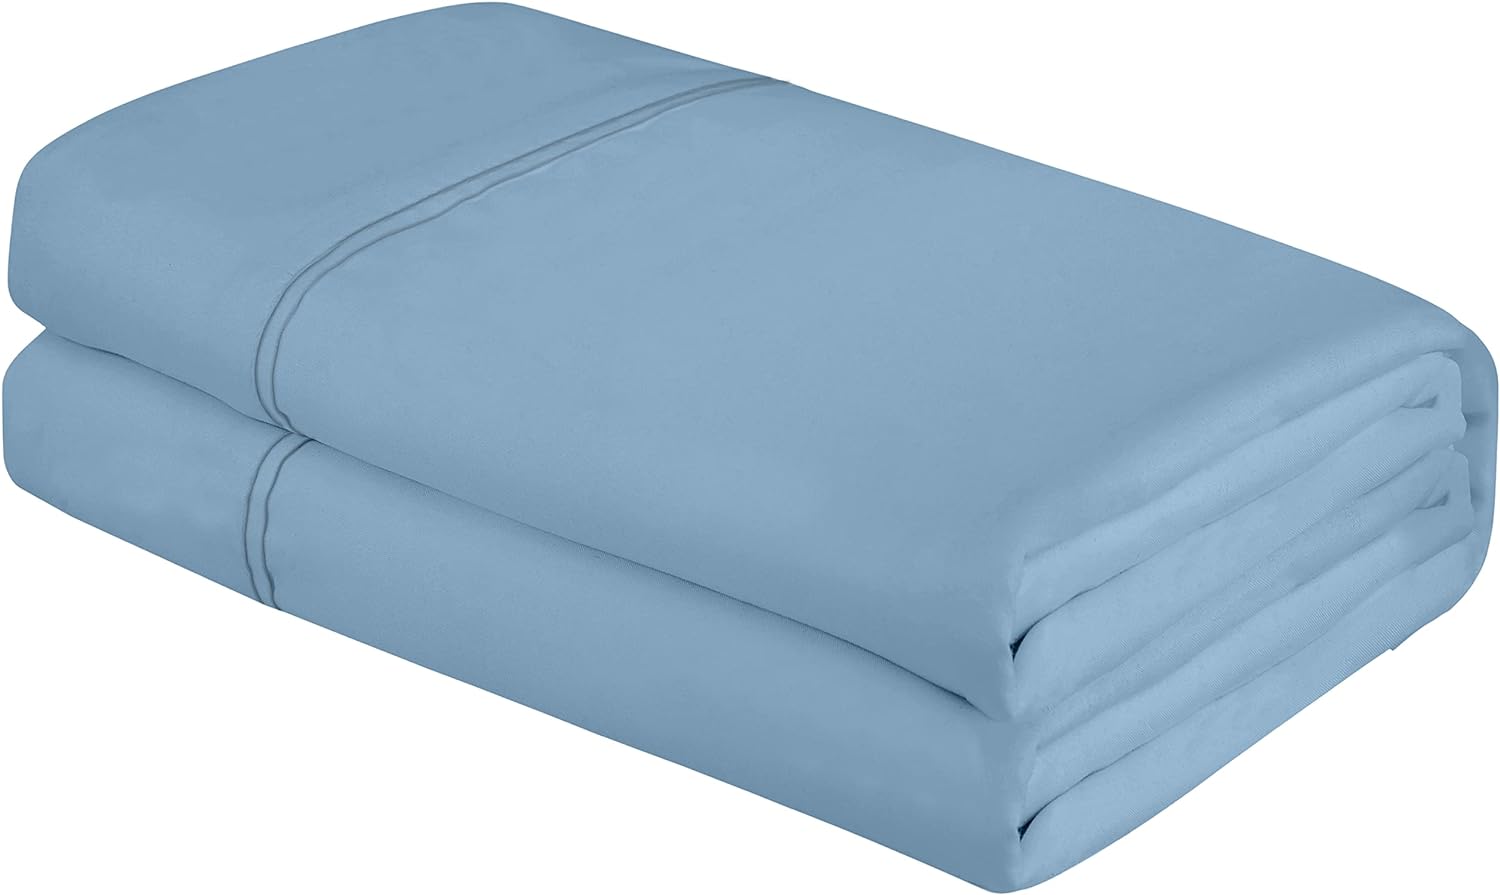 Royale Linens Full Size Flat Sheet Only - Brushed 1800 Microfiber - Ultra Soft & Breathable - Wrinkle & Stain Resistant - Hotel Quality Flat Sheet Sold Separately - Top Sheet For Bed (Full, Lake Blue)